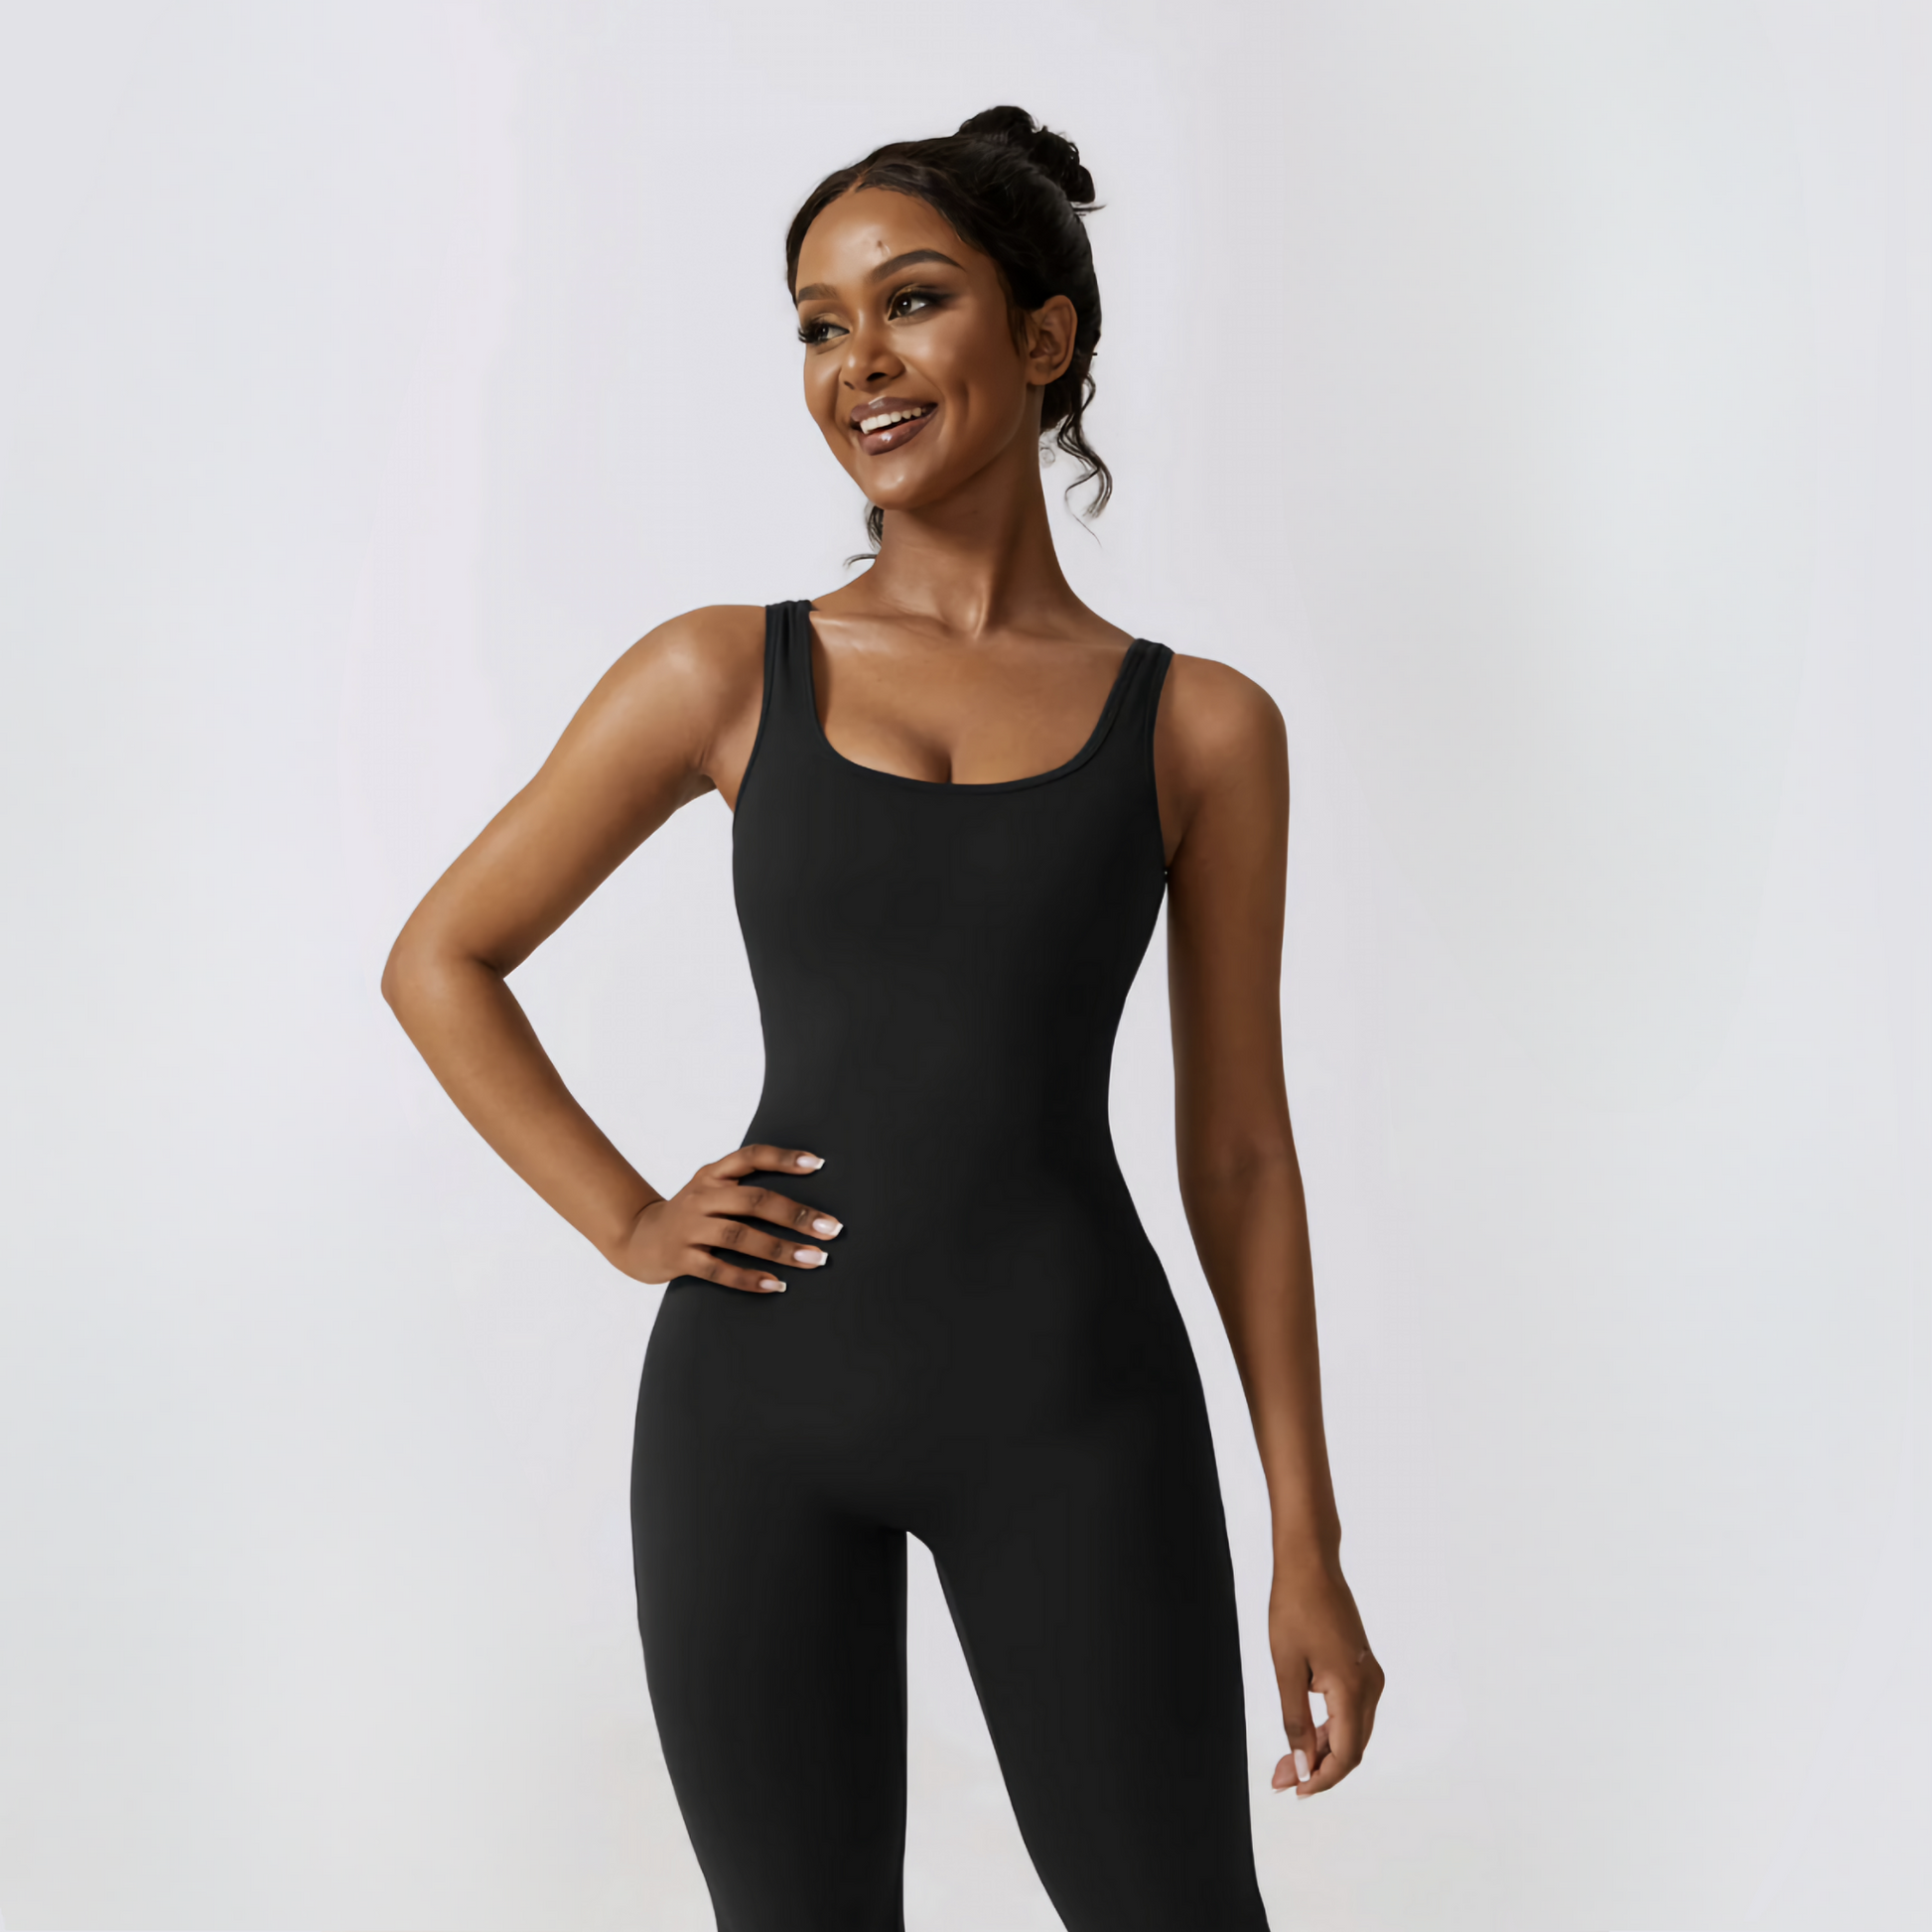 Fitness model smilling, wearing the cute and sexy Samara jumpsuit  in black from Vibras Activewear.